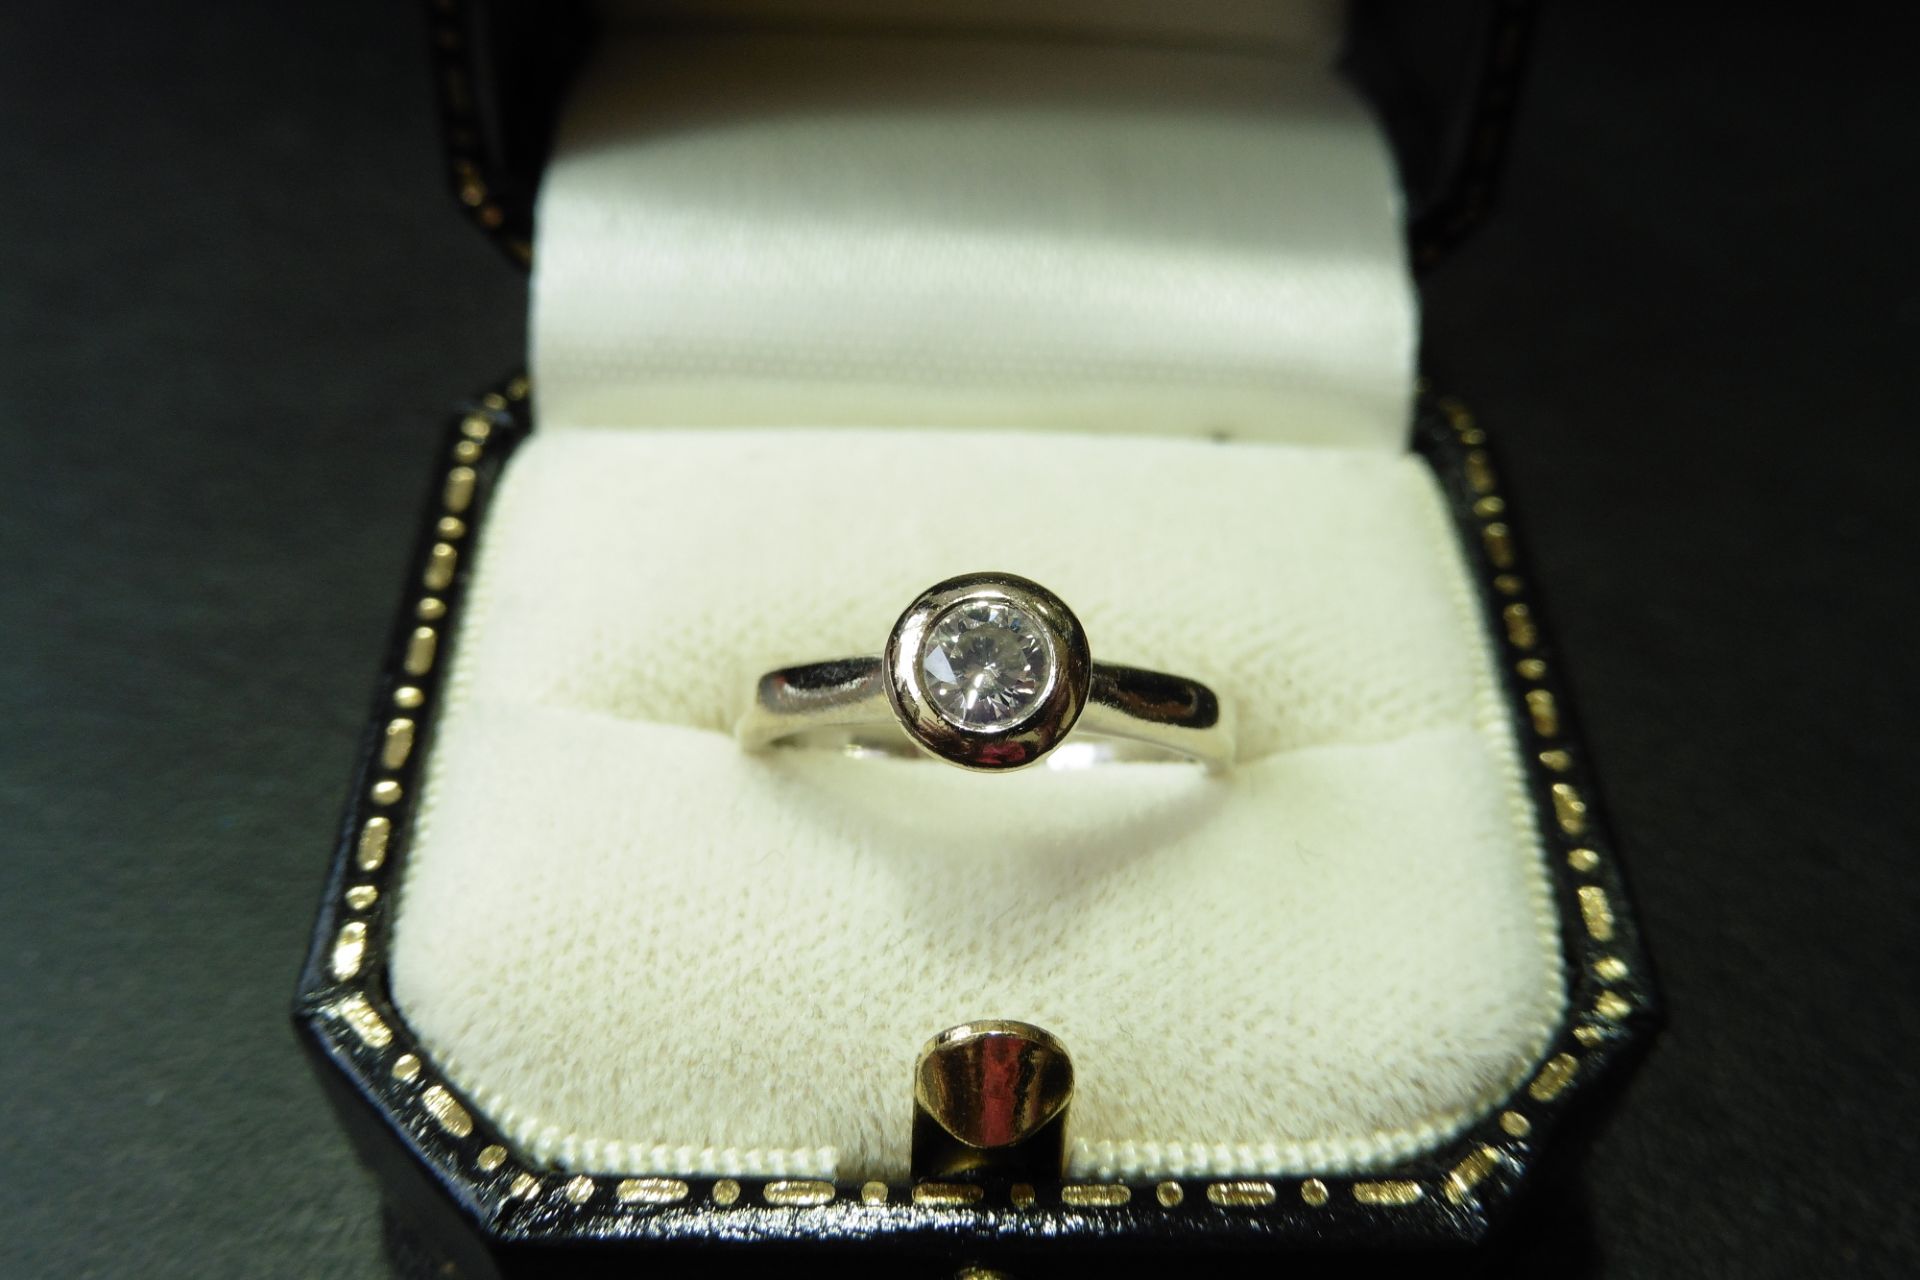 Pre-owned 18ct white gold diamond solitaire ring set with a 0.30ct brilliant cut diamond, H/I colour